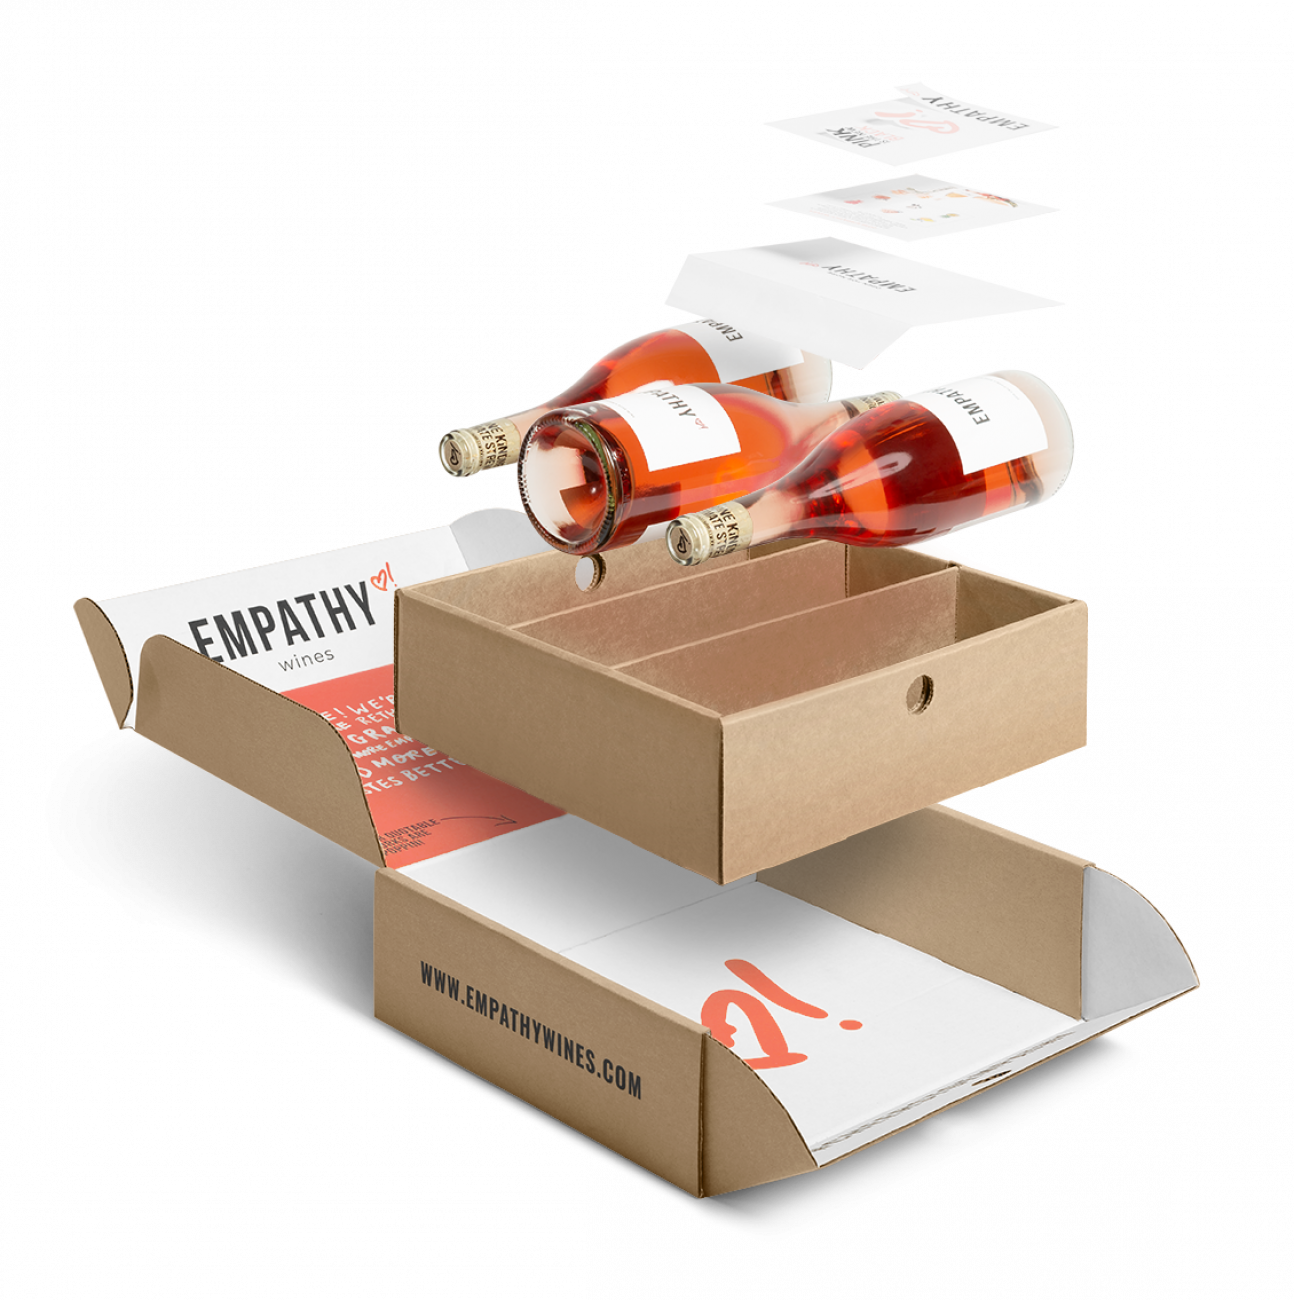 Empathy Wines Corrugated Mailer Boxes, Corrugated Inserts, Paper Envelopes, Flat Cards, Kiss Cut Sticker Sheets